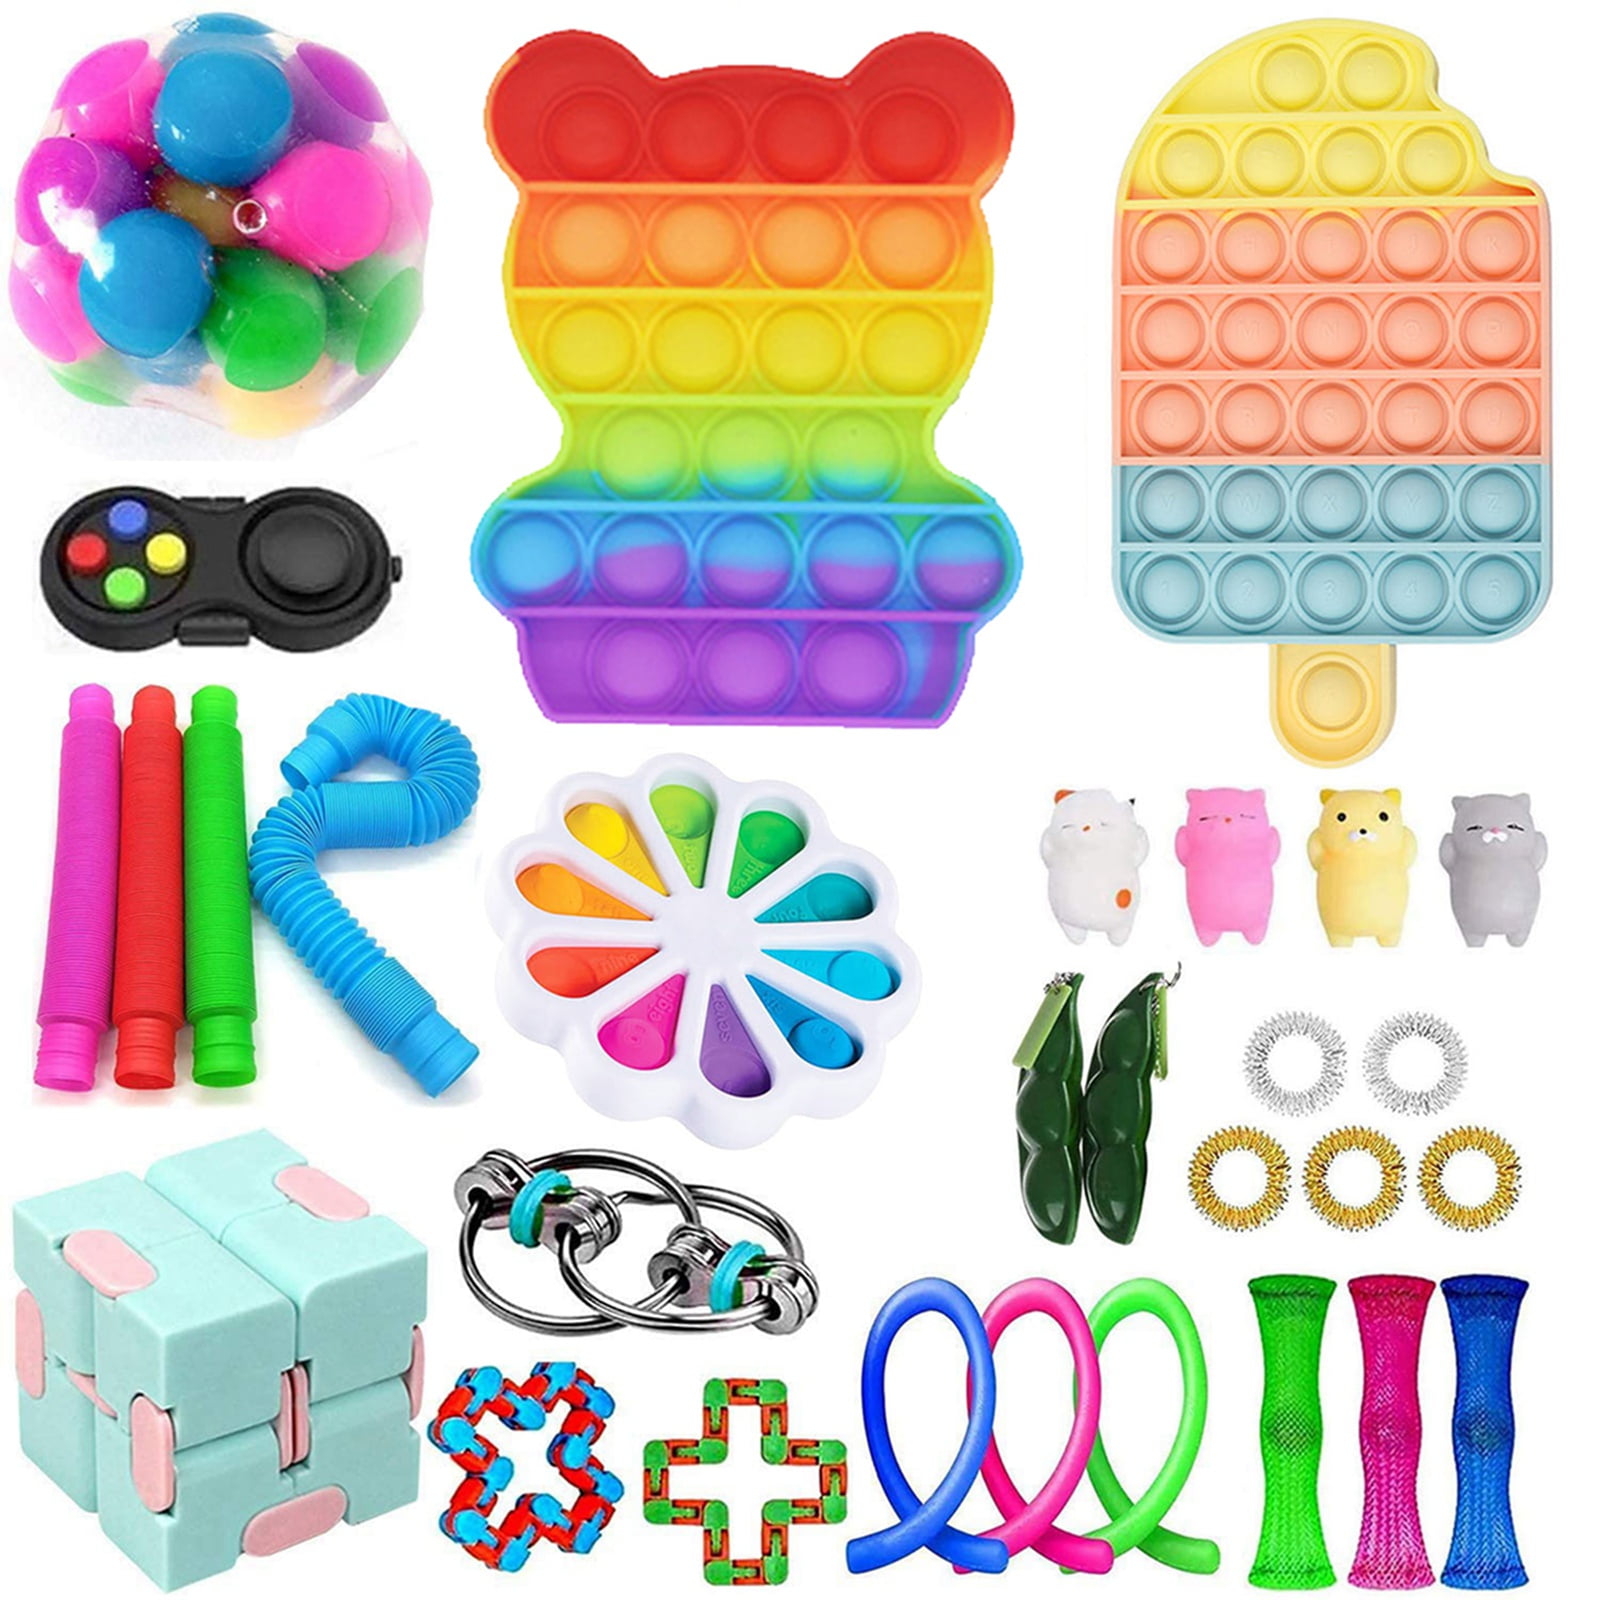 Details about   12 PCS Sensory Fidget Toys ADHD With Bubble Sensory Games Anxiety Relief Stress 